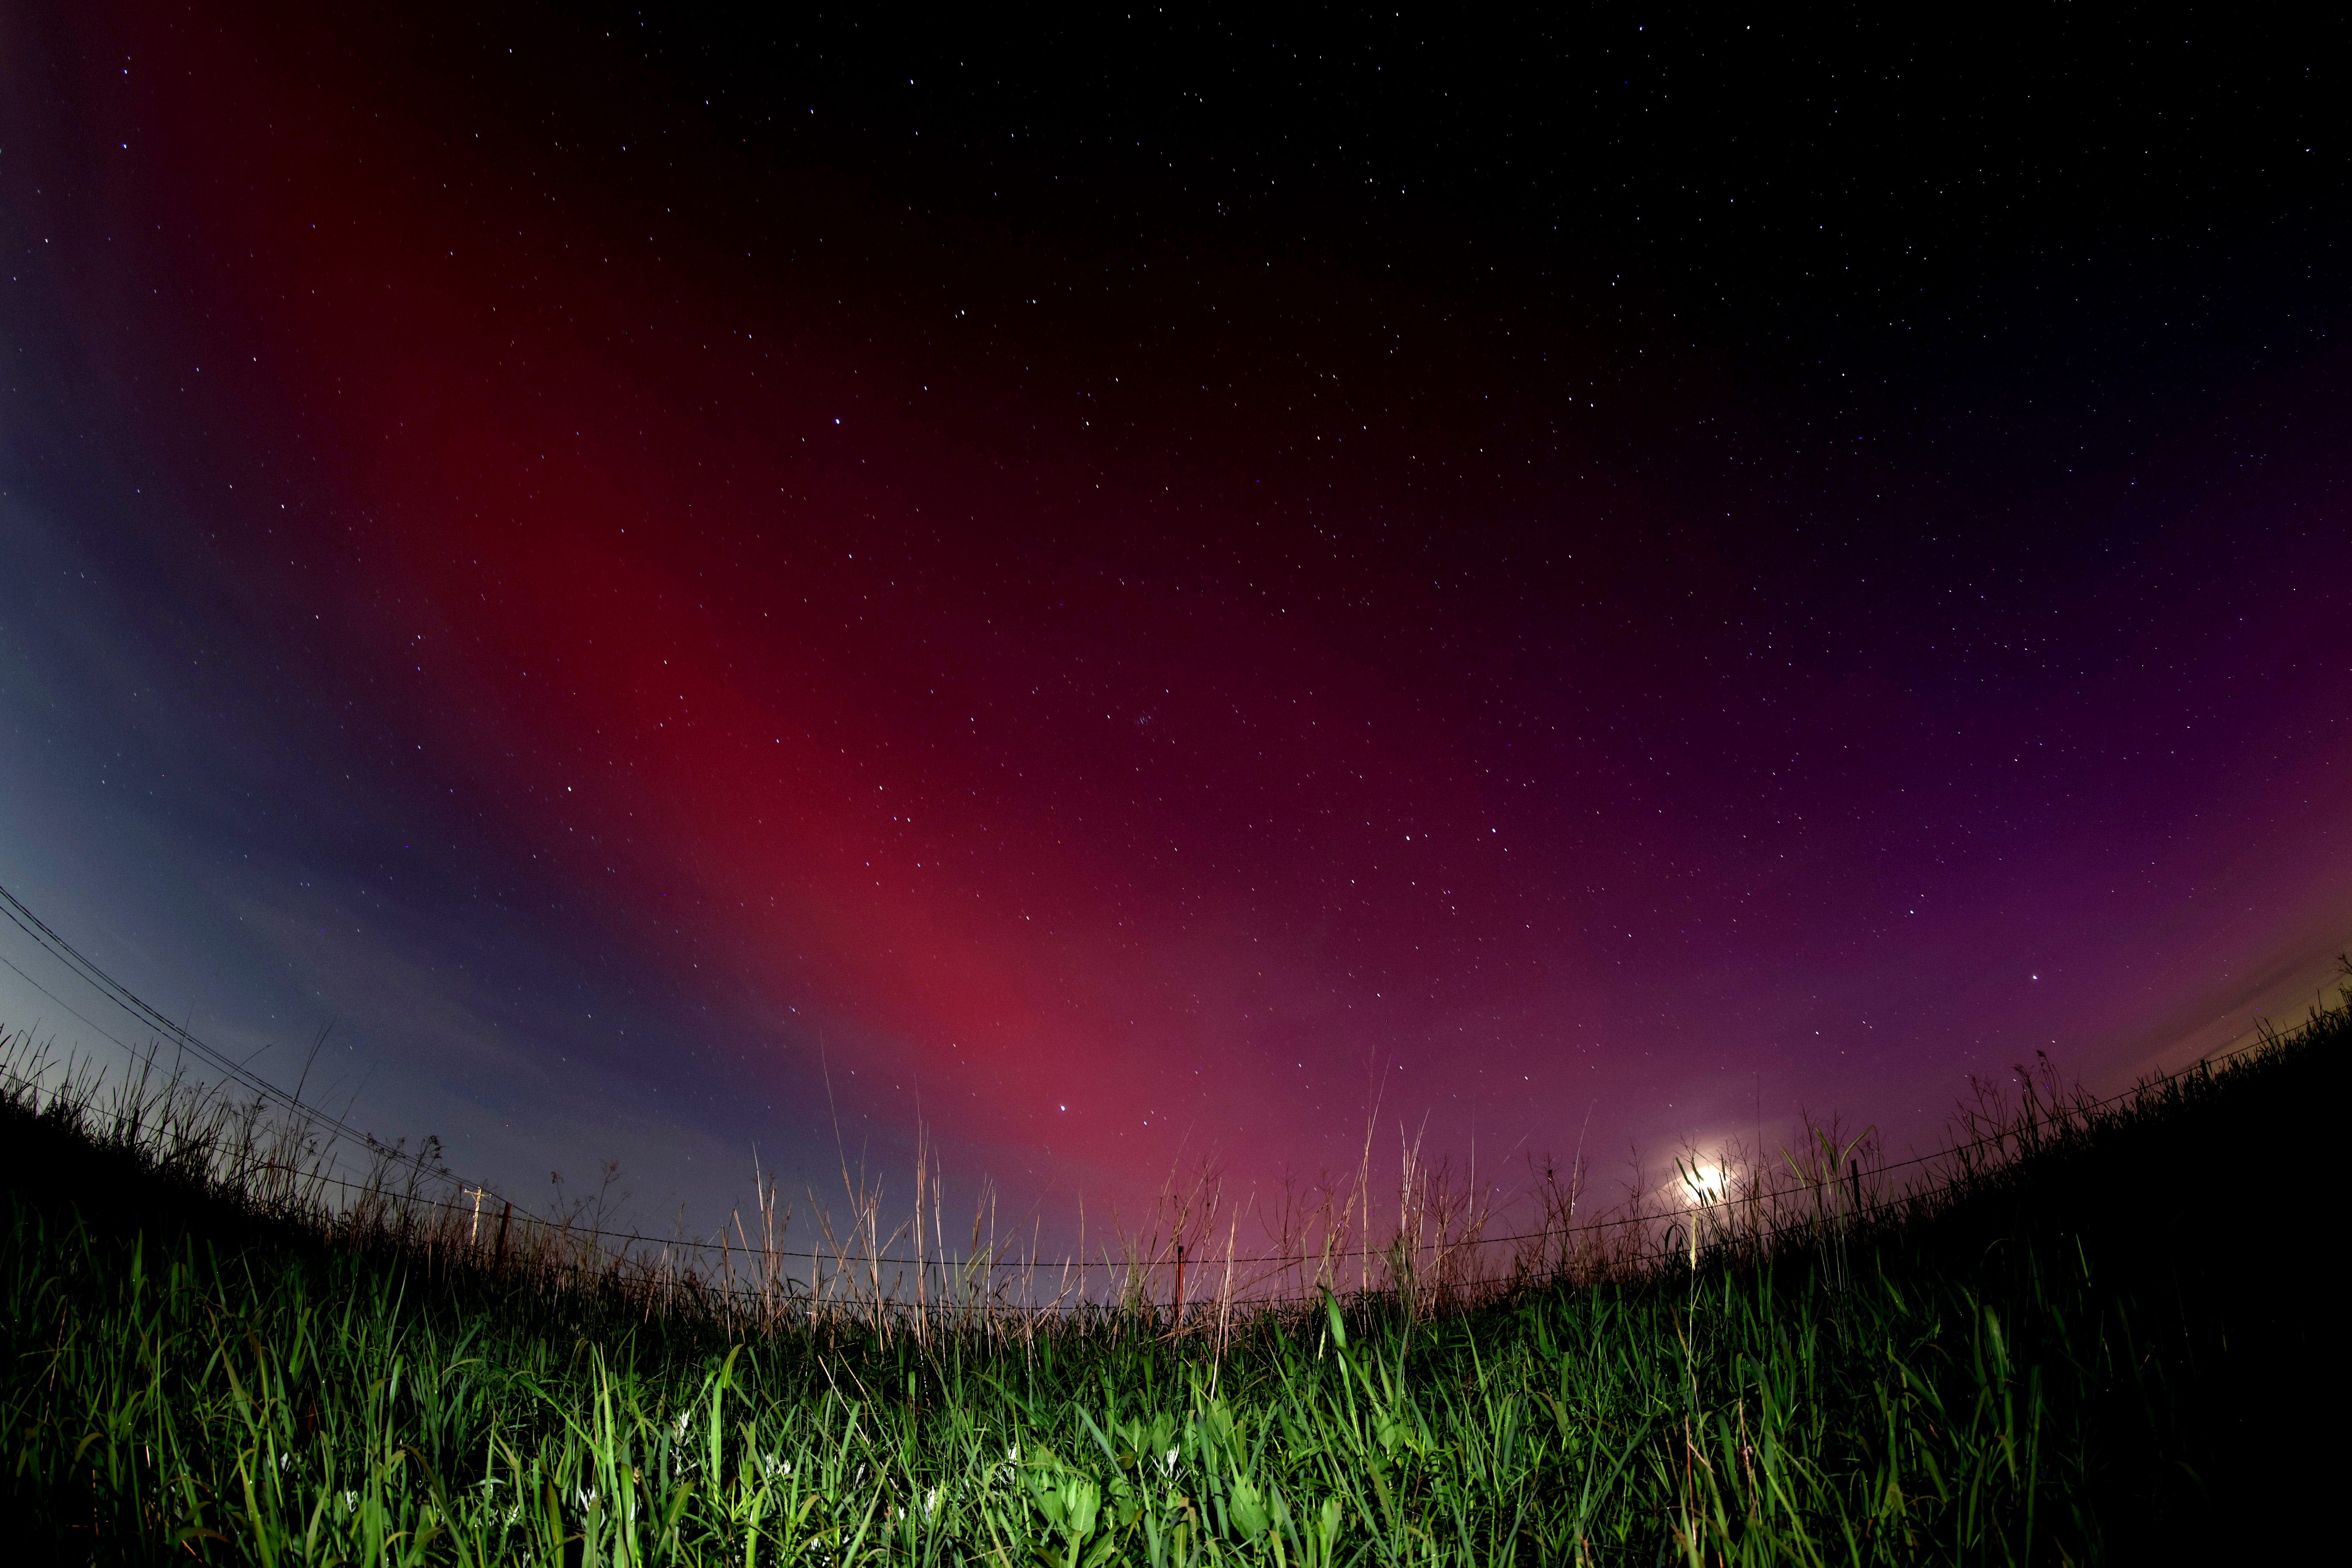 Northern lights could be visible this week. When to look for aurora borealis in Oklahoma